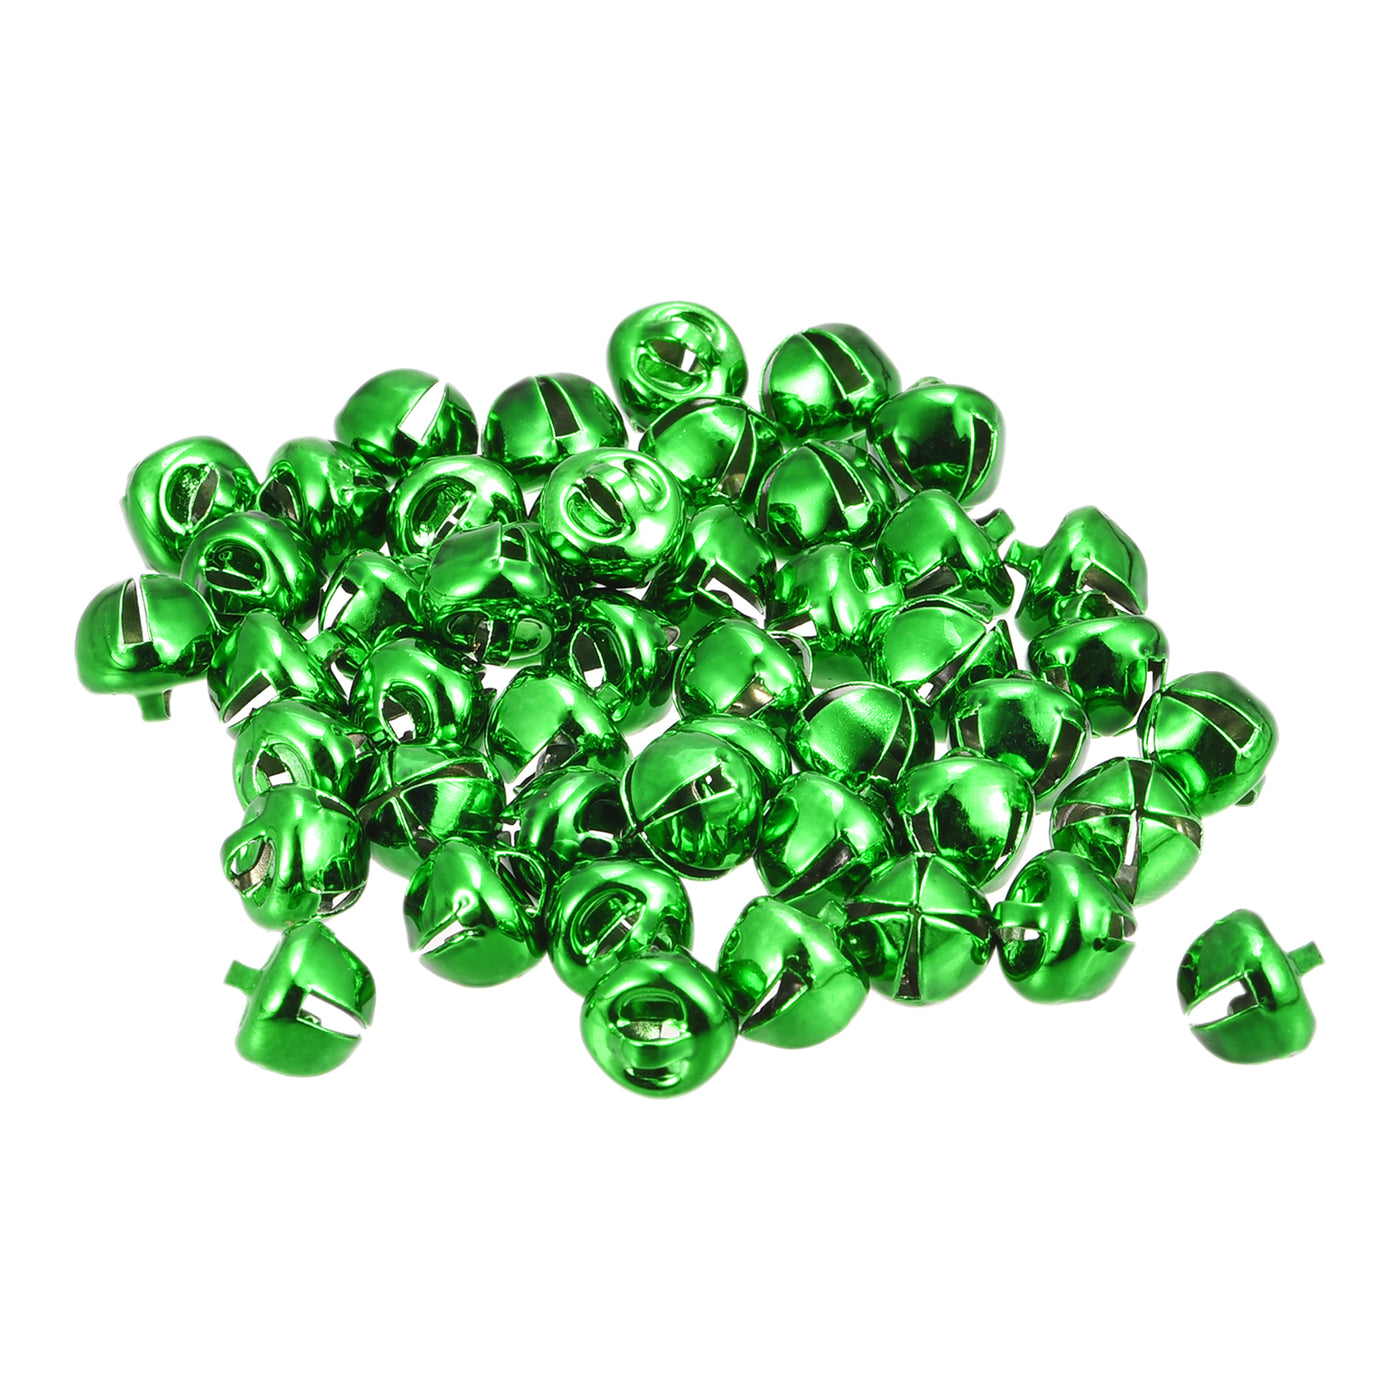 uxcell Uxcell Jingle Bells, 8mm 24pcs Small Bells for Crafts DIY Christmas, Green